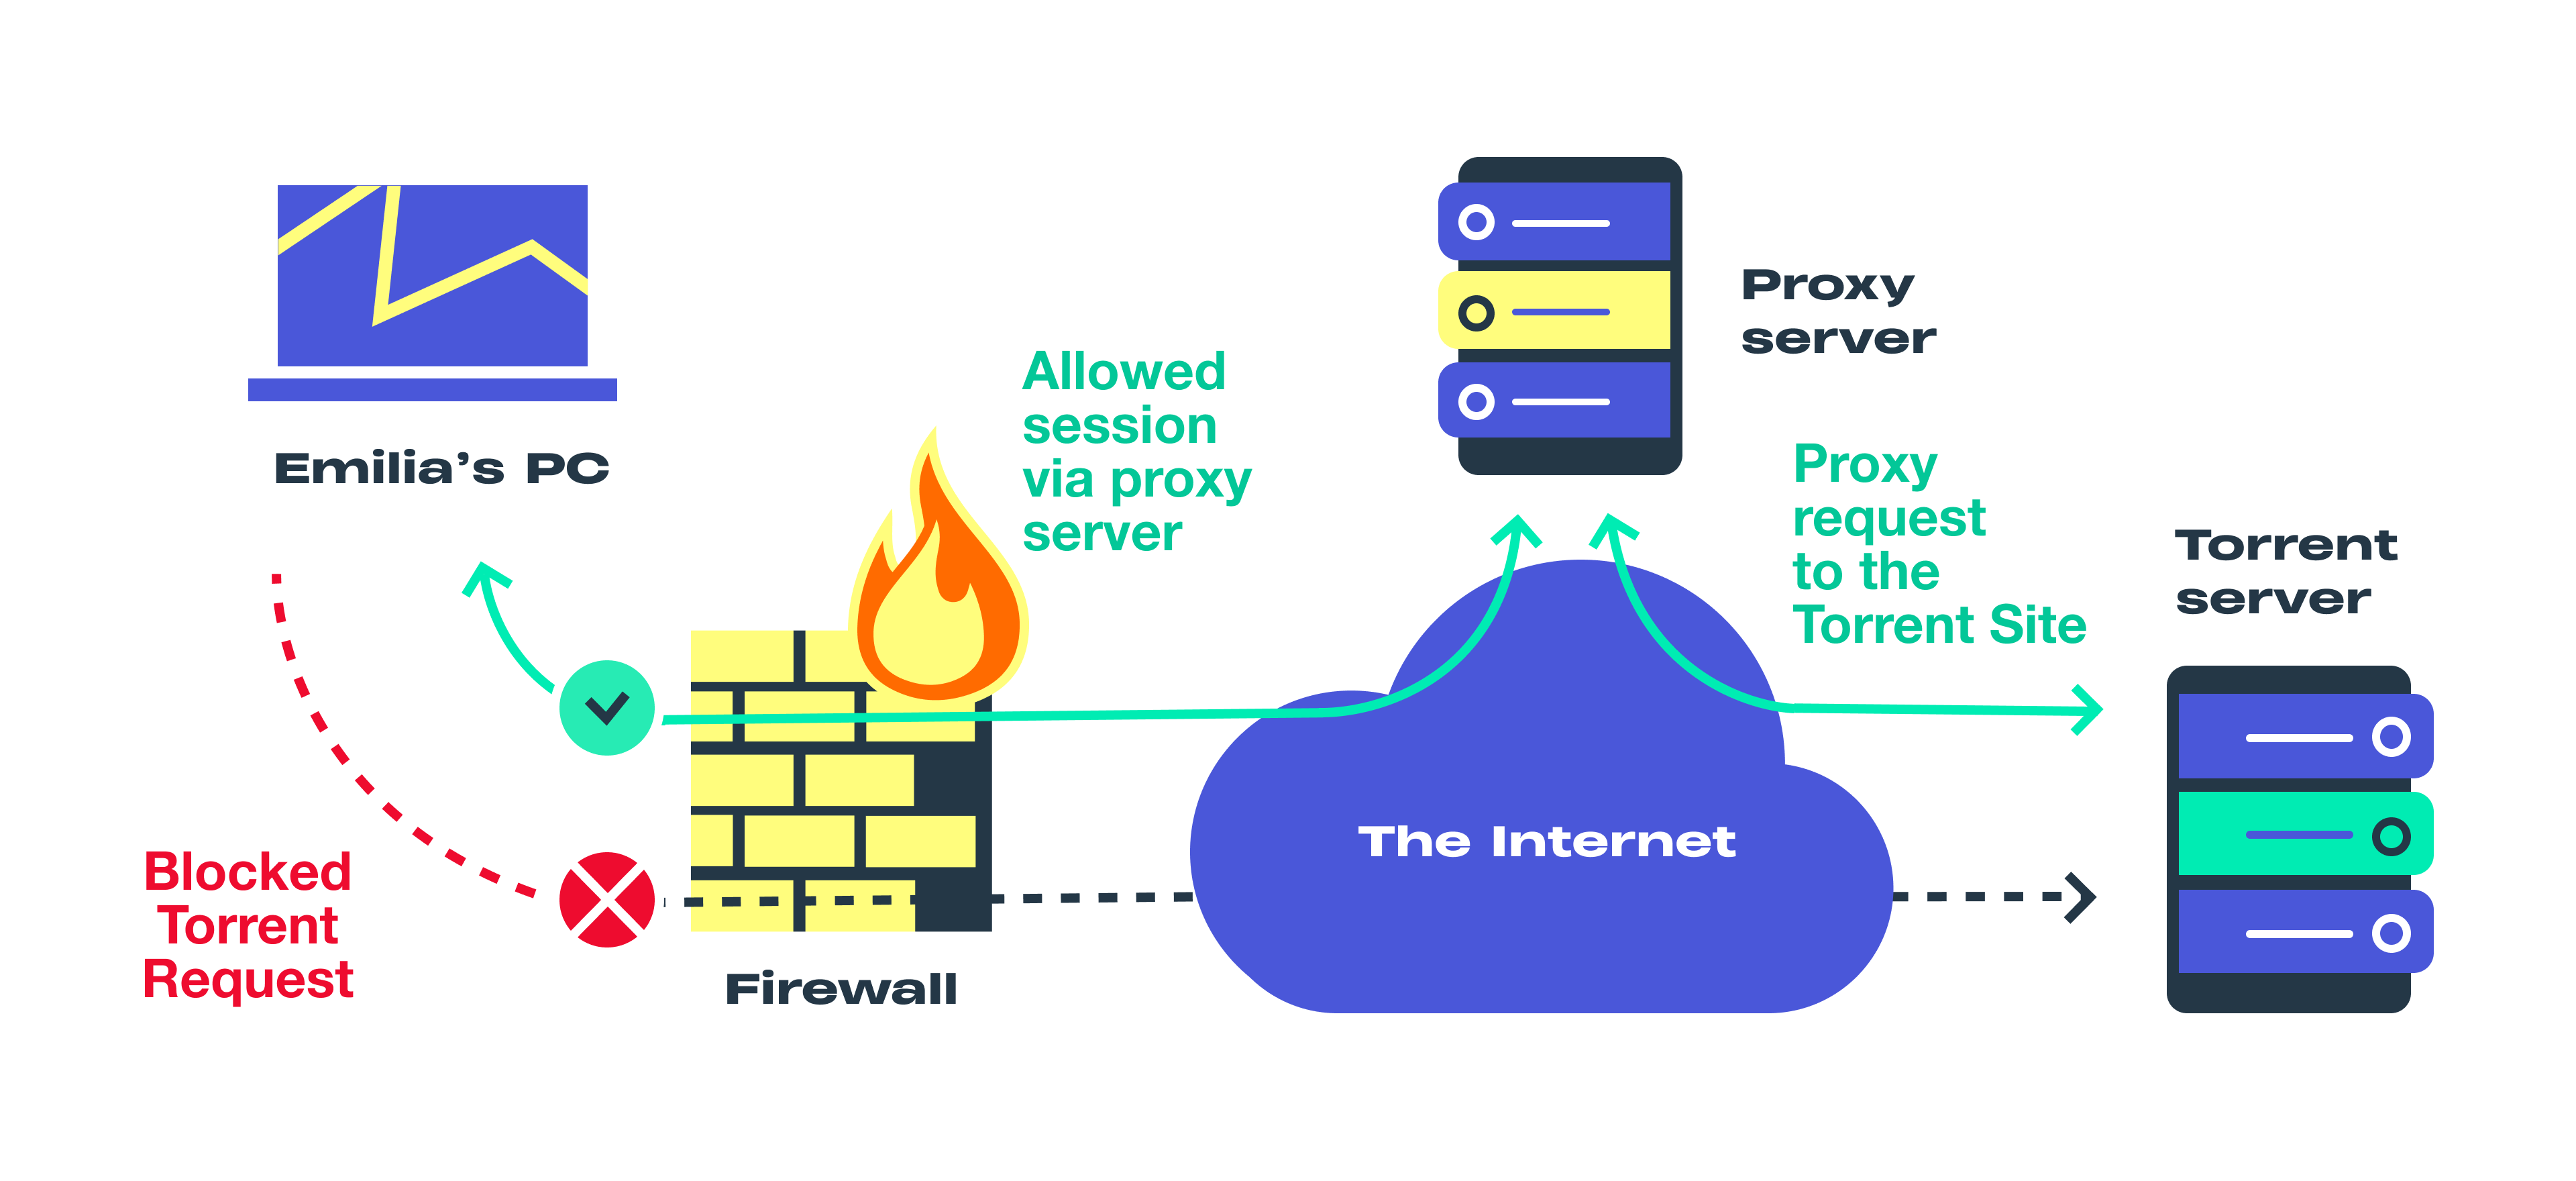 What is a Proxy Server? Definition + Explanation - Seobility Wiki